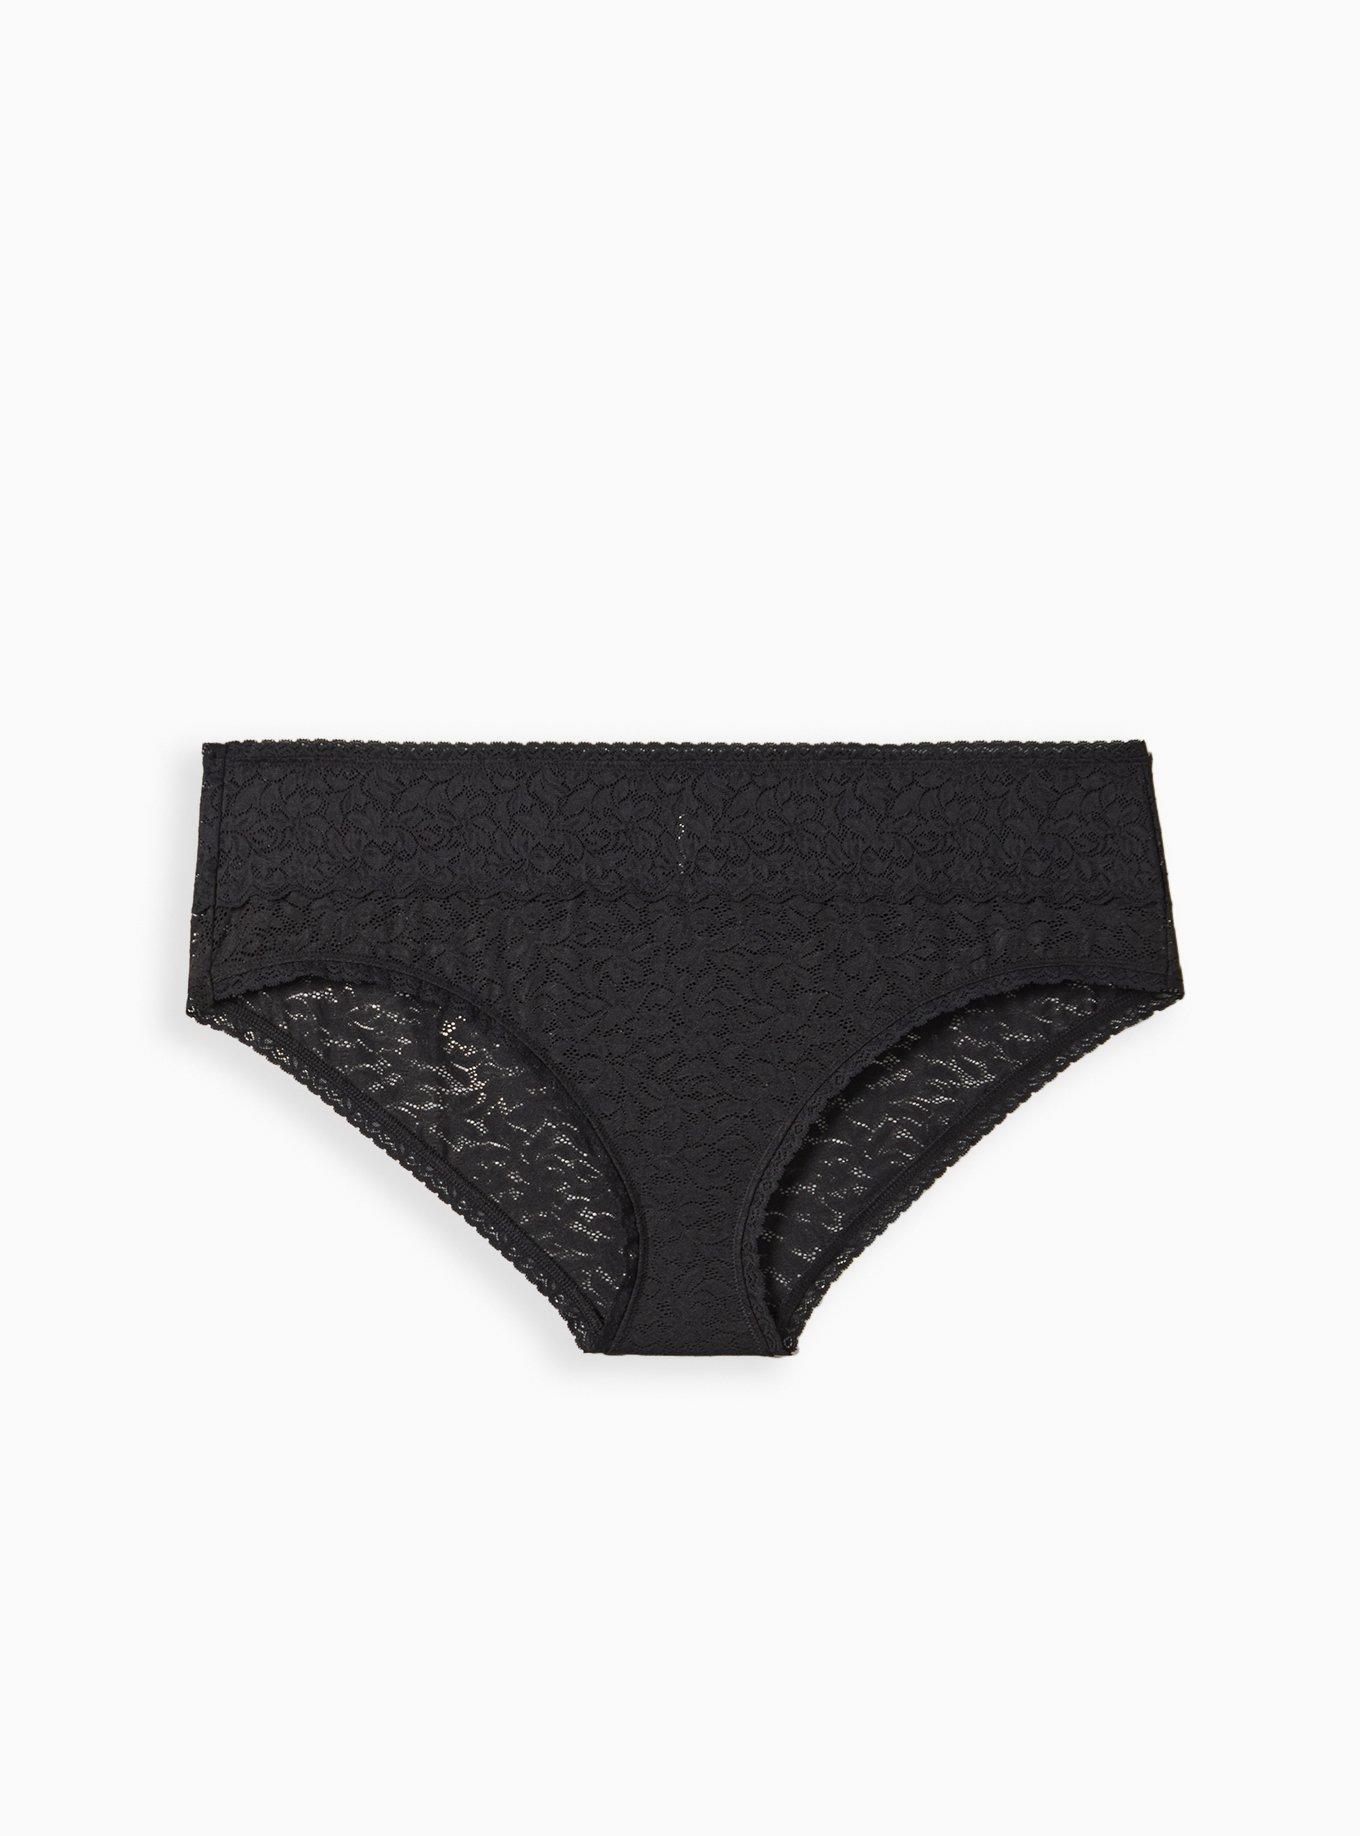 Stretch Sexy Lace Cheeky Hipster Panty Black